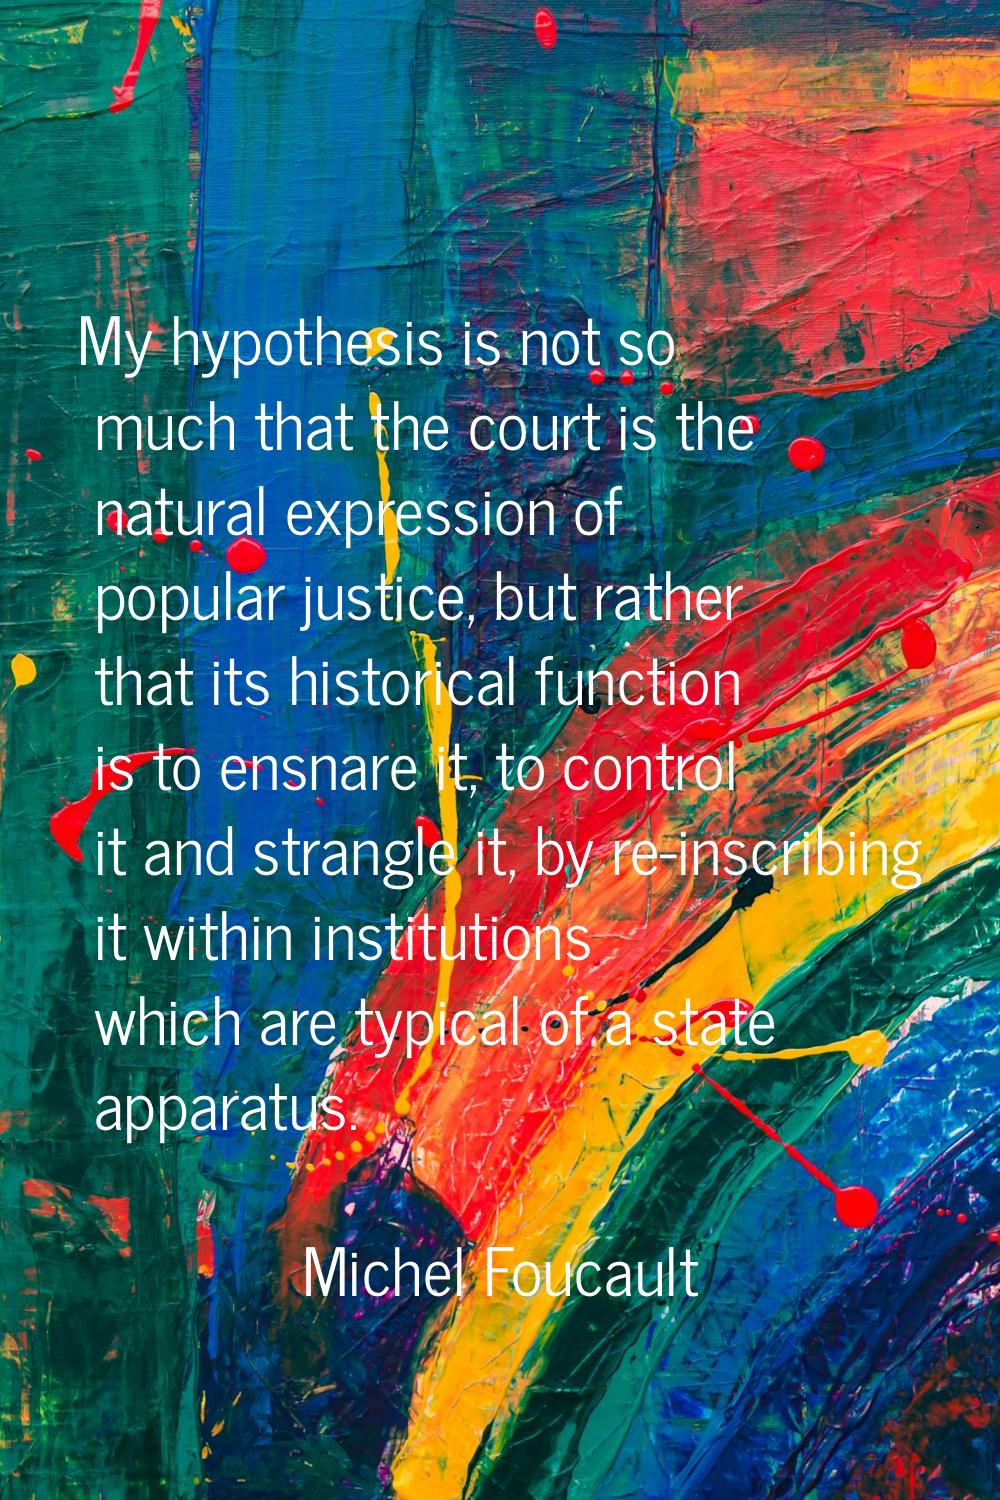 My hypothesis is not so much that the court is the natural expression of popular justice, but rathe